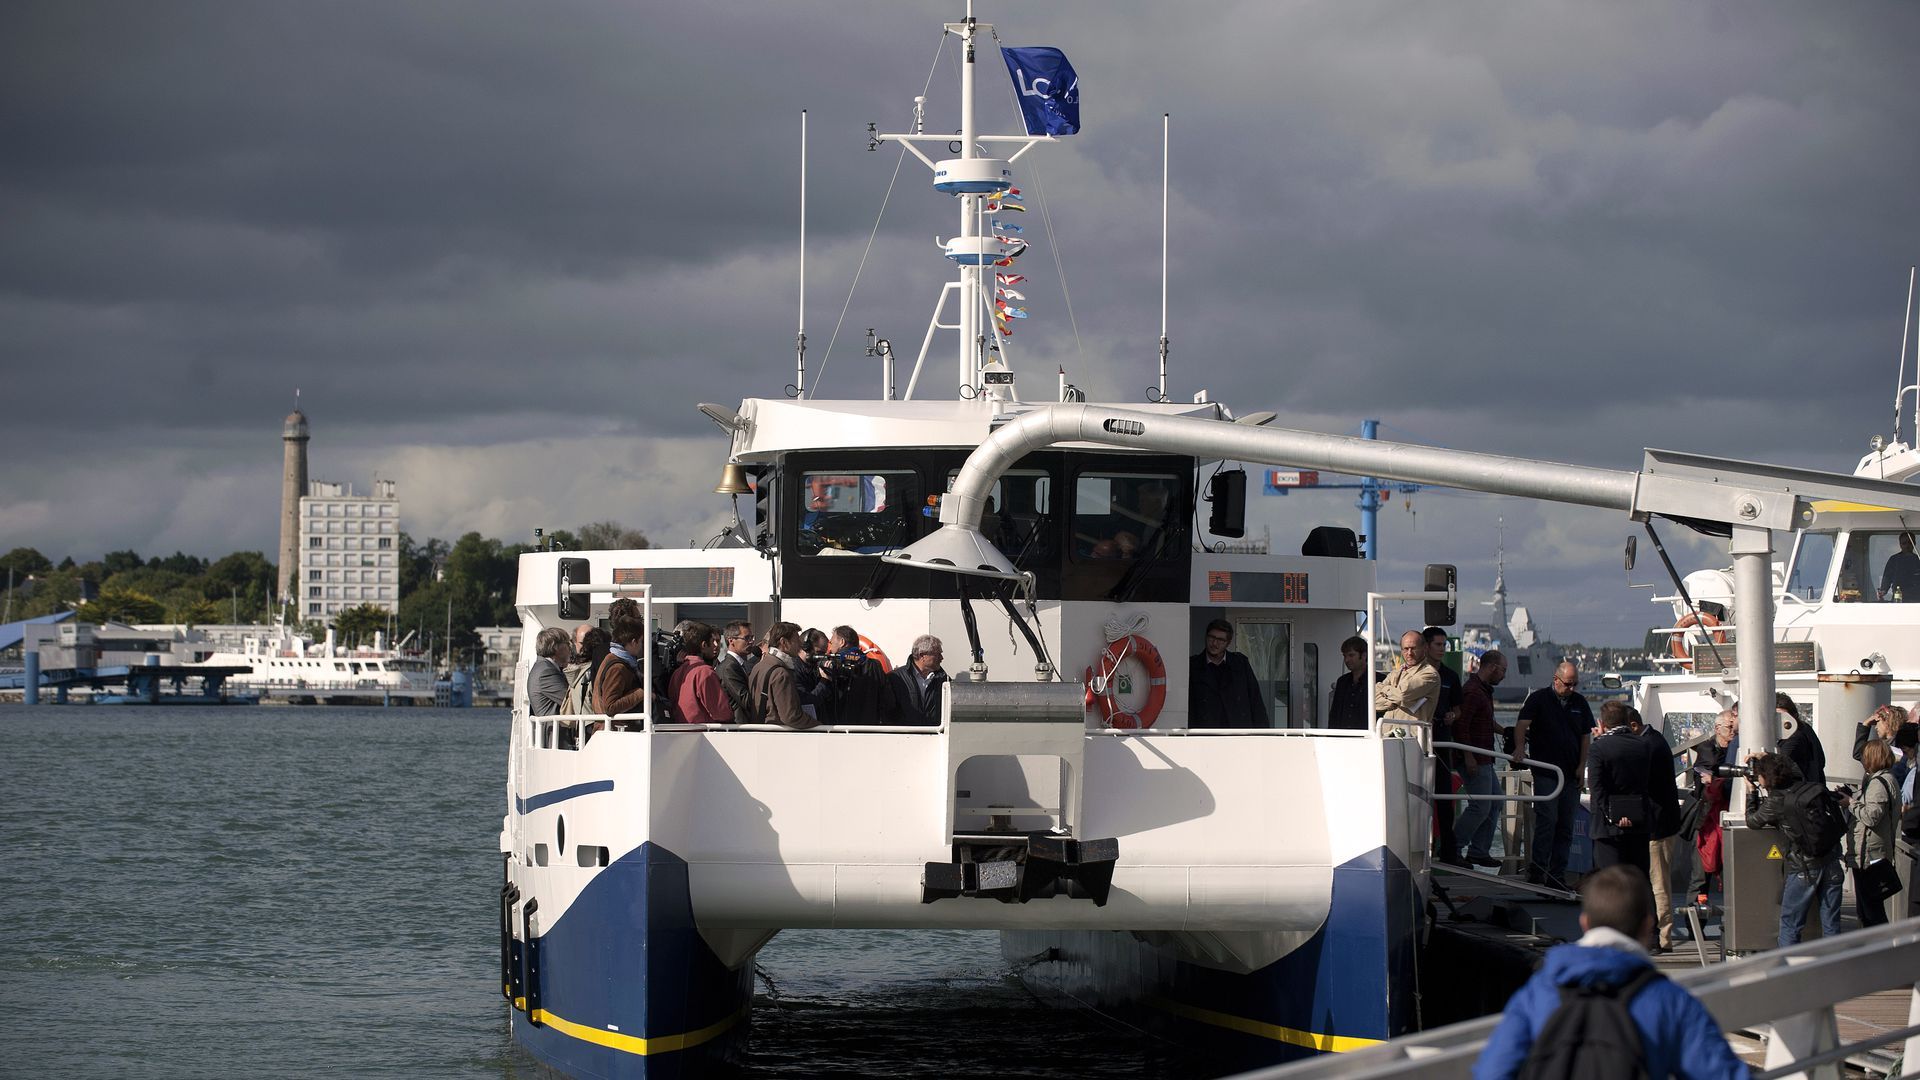 An electric ferry in France